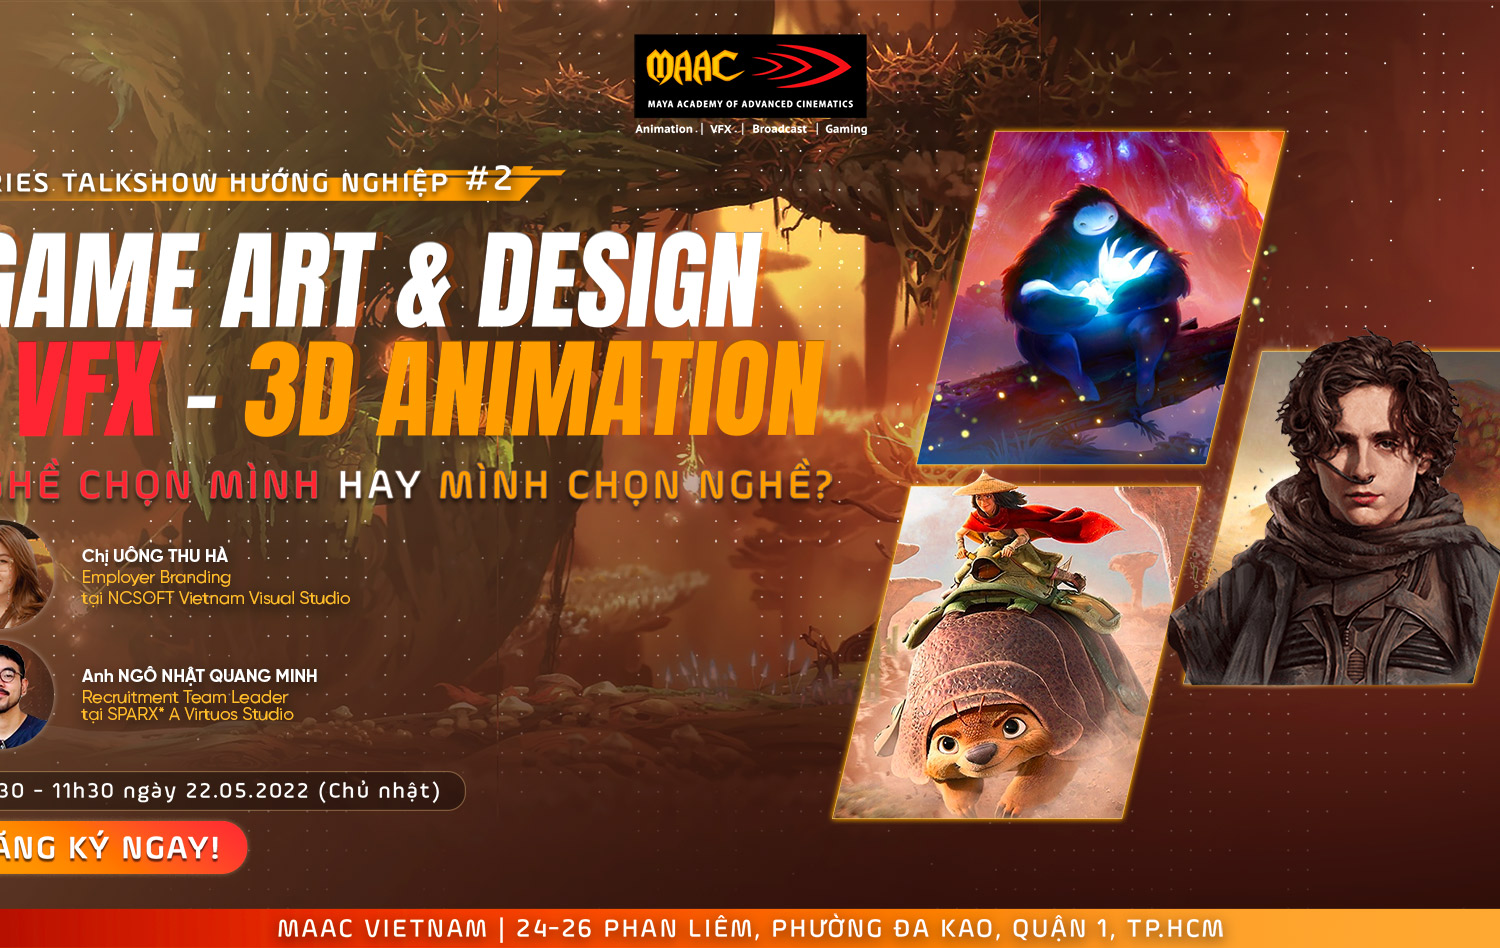 game-art-design-3d-animation-visual-effects-nghe-chon-minh-hay-minh-chon-nghe